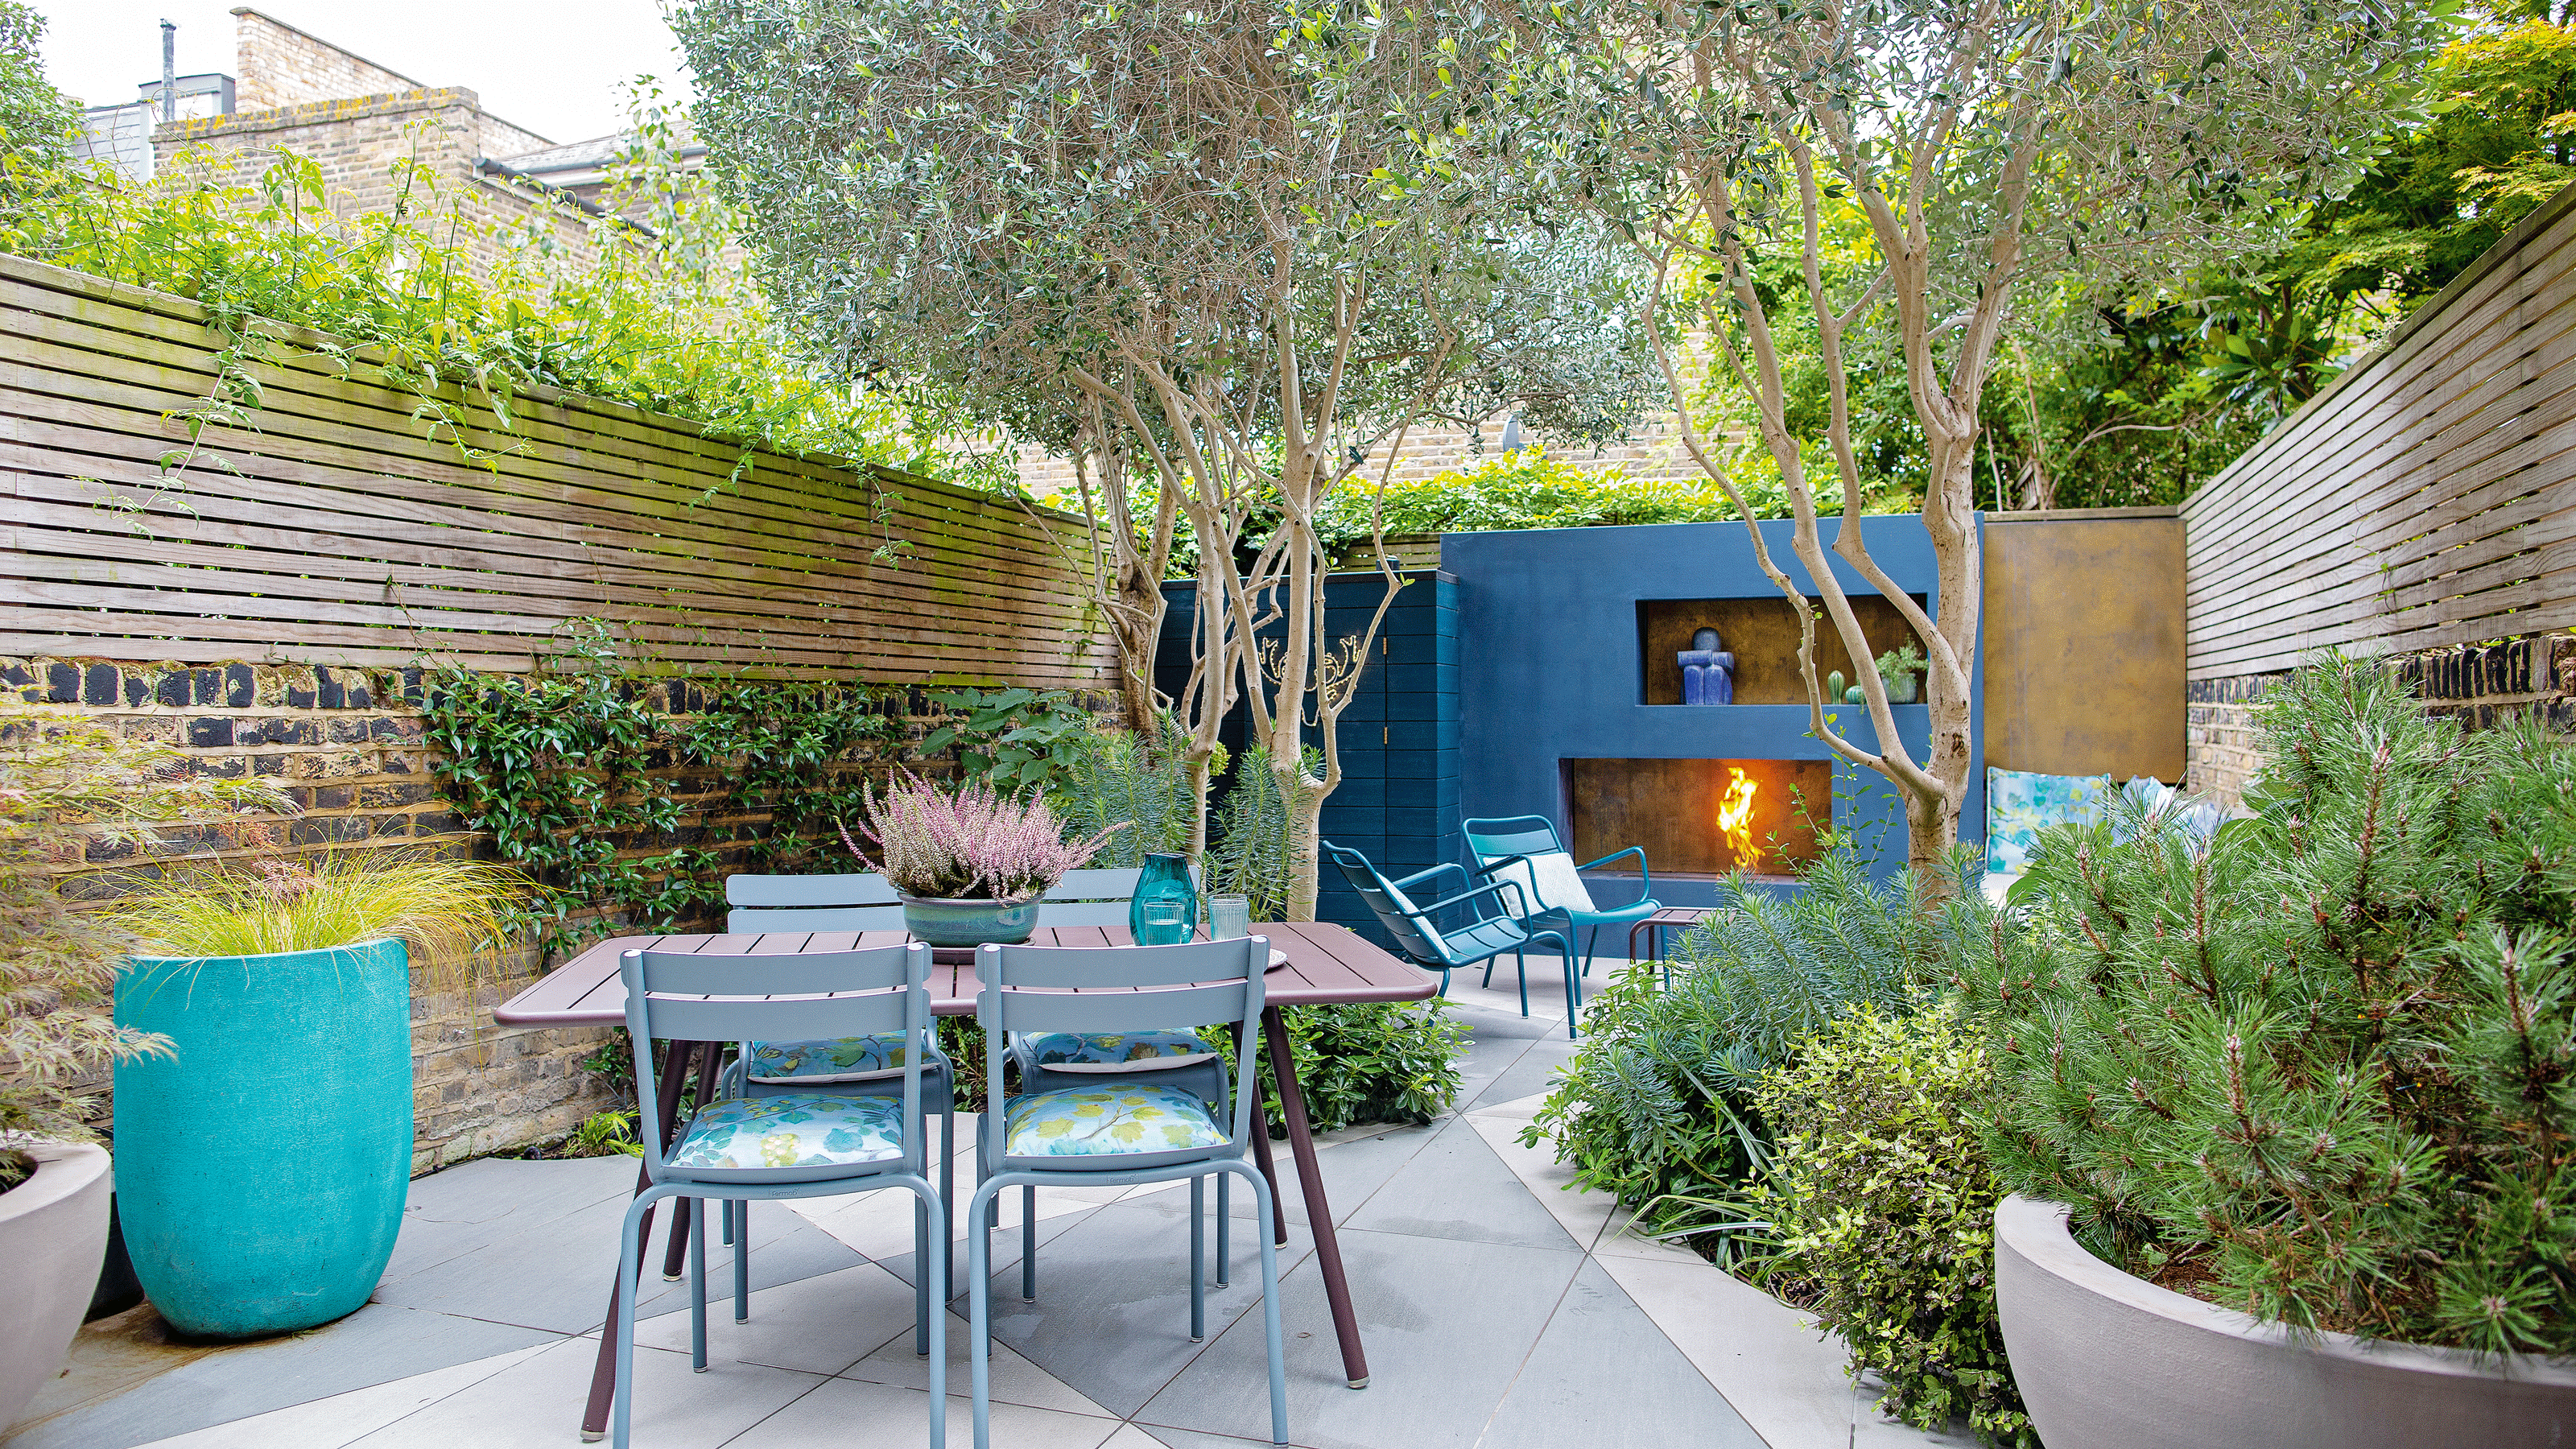 Patio with blue fire place and metal furniture